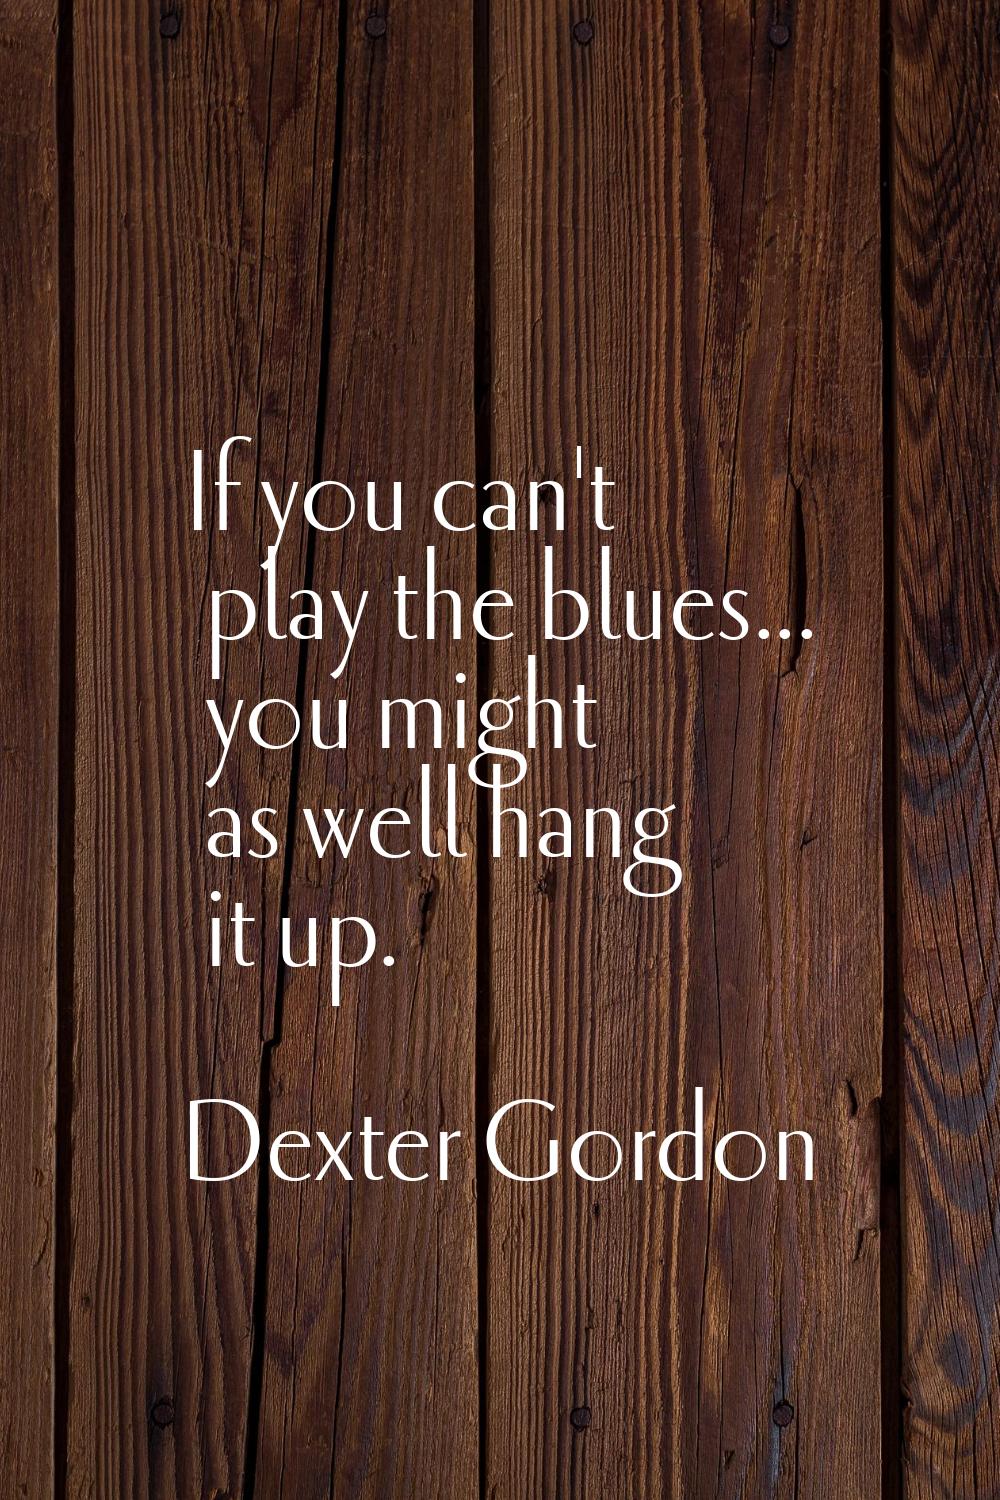 If you can't play the blues... you might as well hang it up.